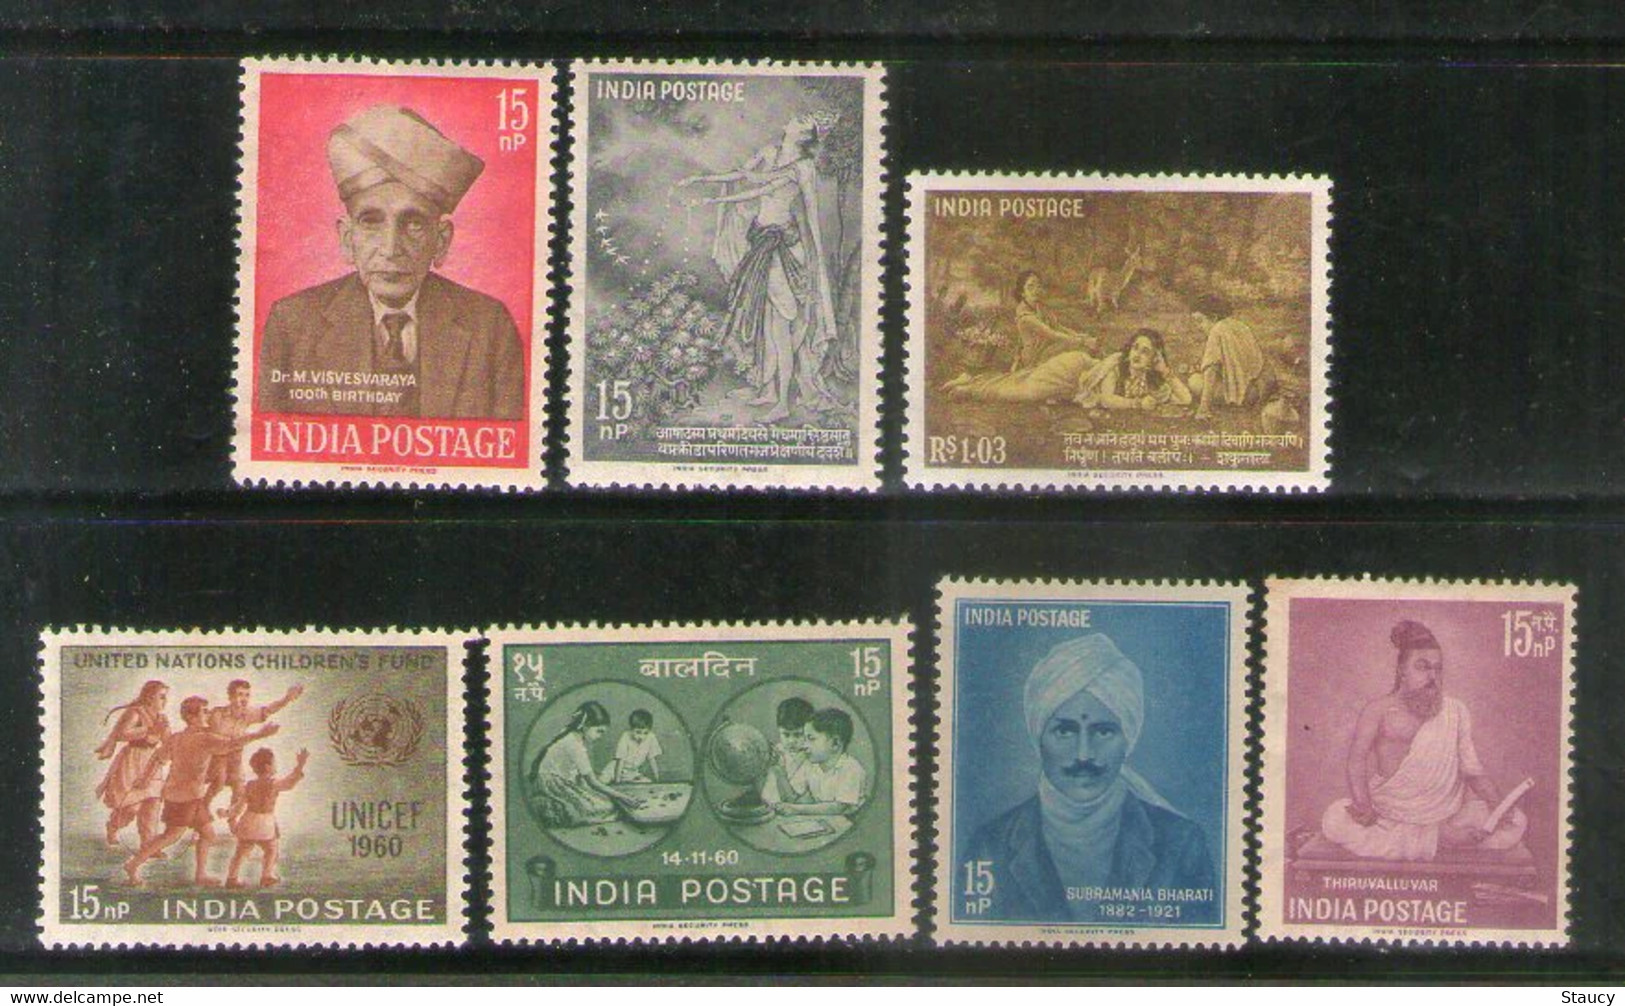 India 1960 Complete Year Pack / Set / Collection Total 7 Stamps (No Missing) MNH As Per Scan - Volledig Jaar